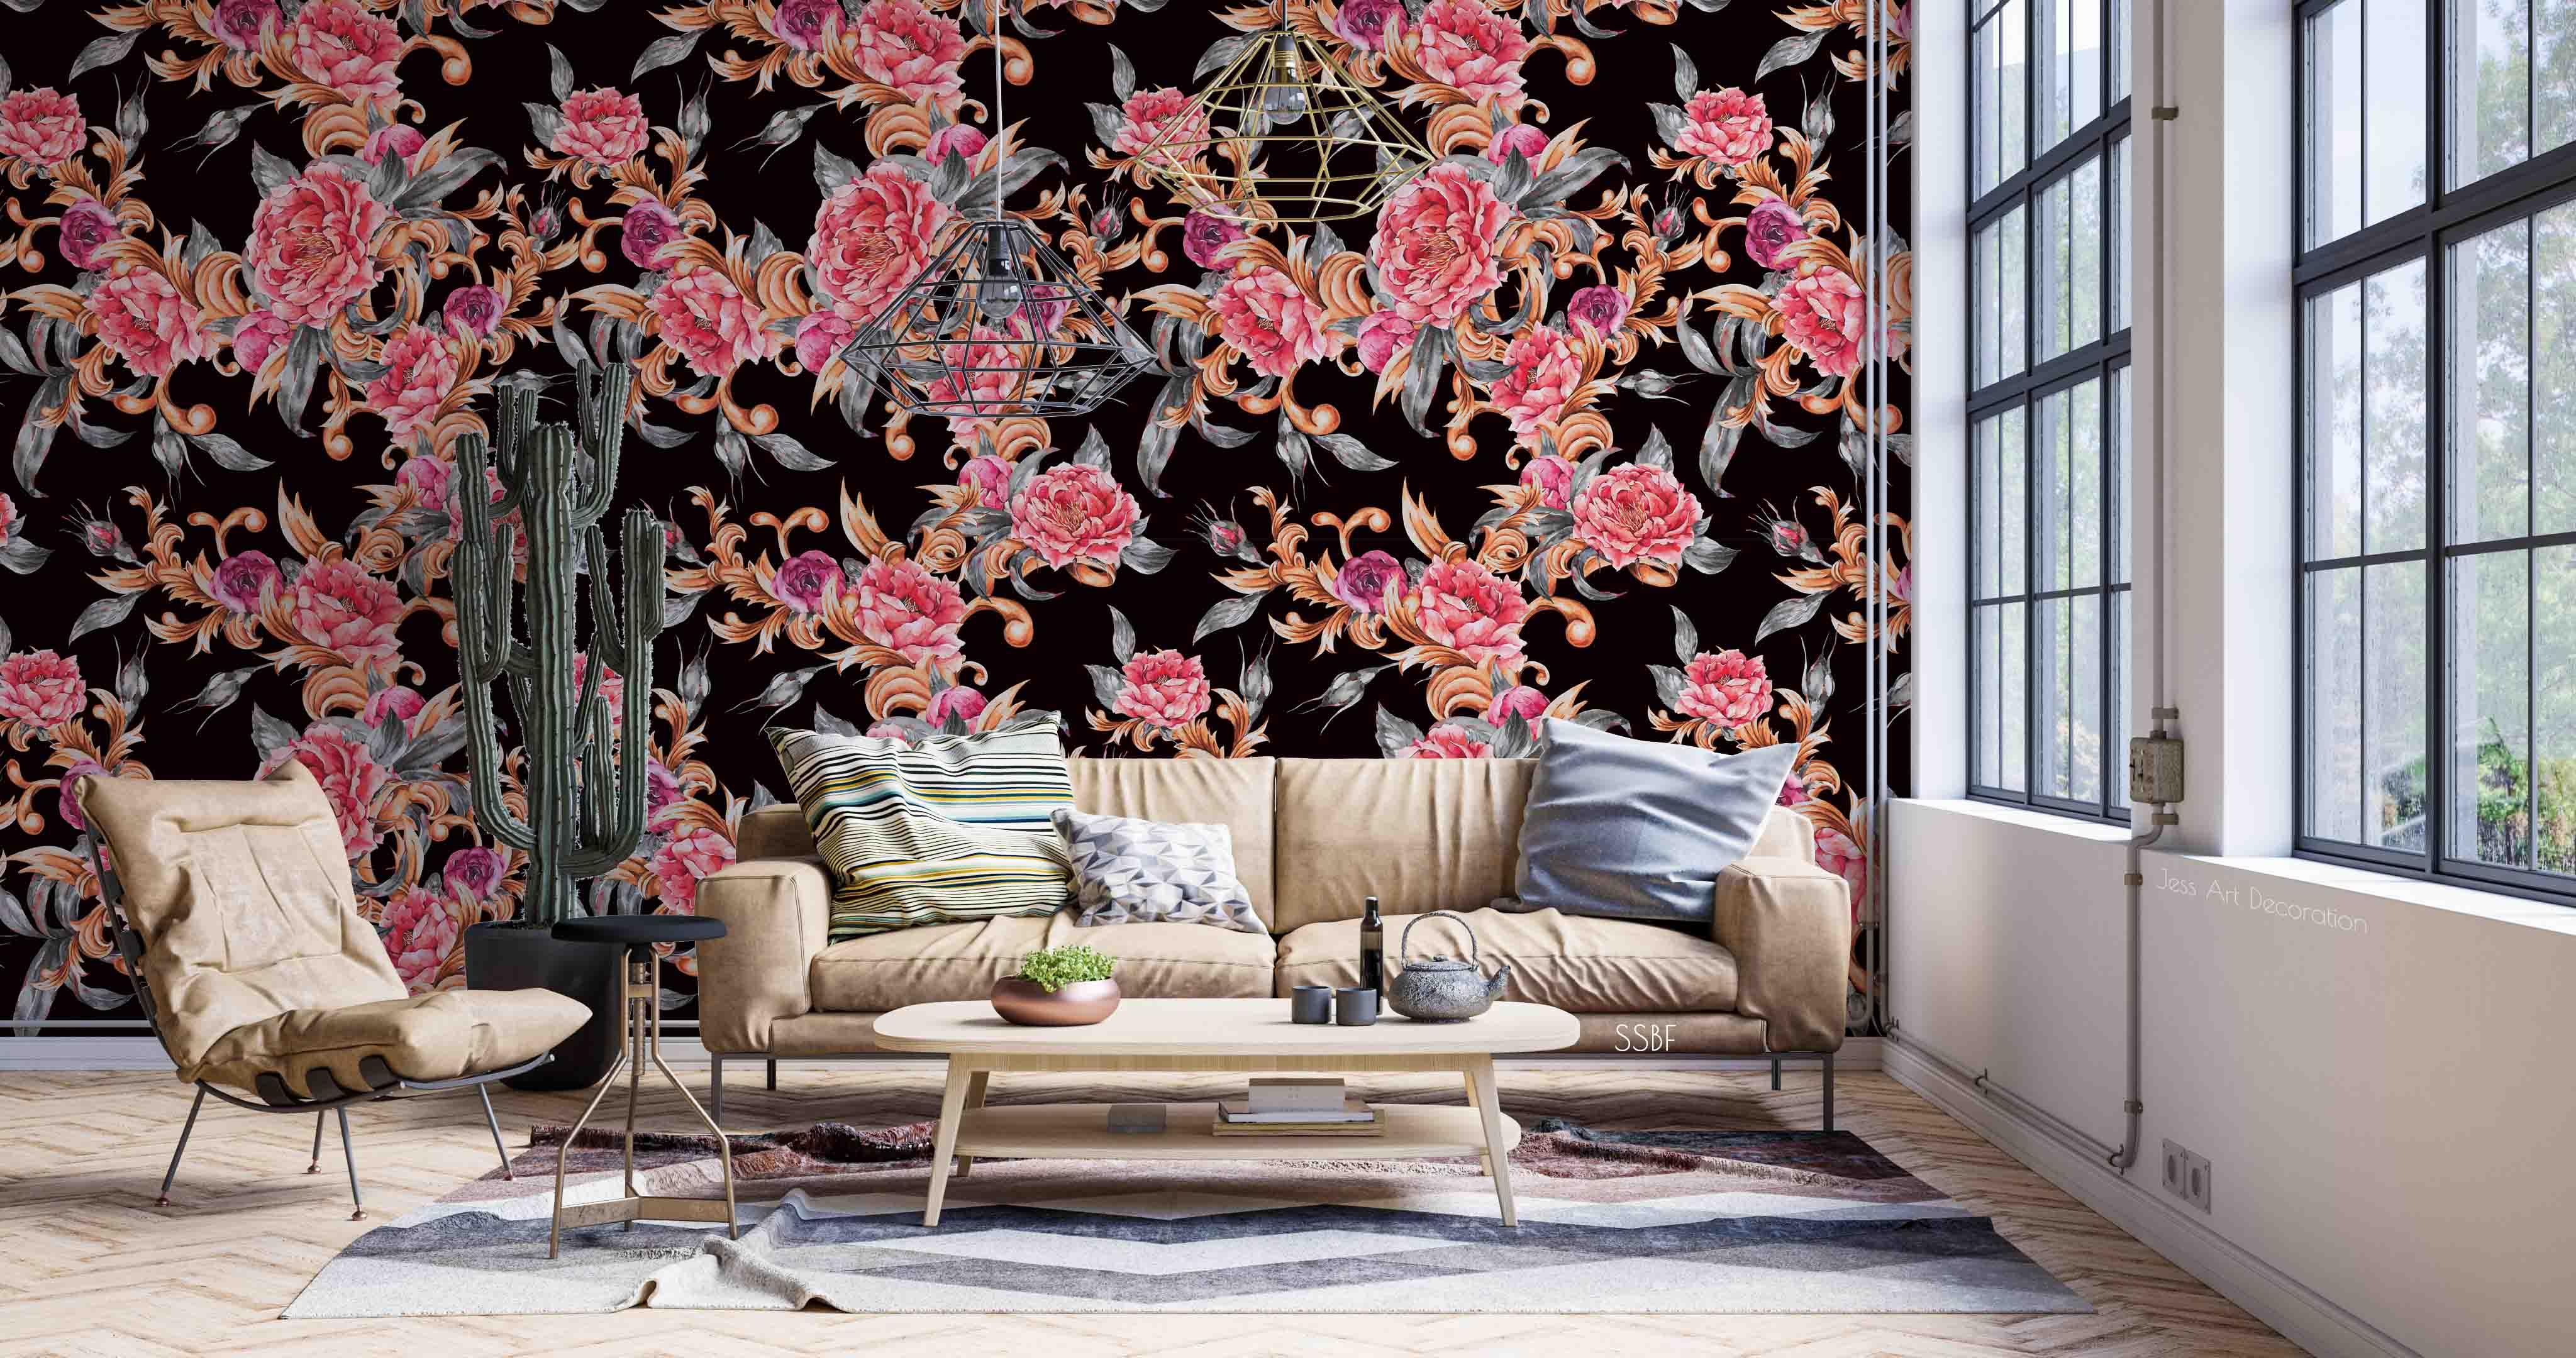 3D Vintage Baroque Art Blooming Pink Peony Black Background Wall Mural Wallpaper GD 3564- Jess Art Decoration